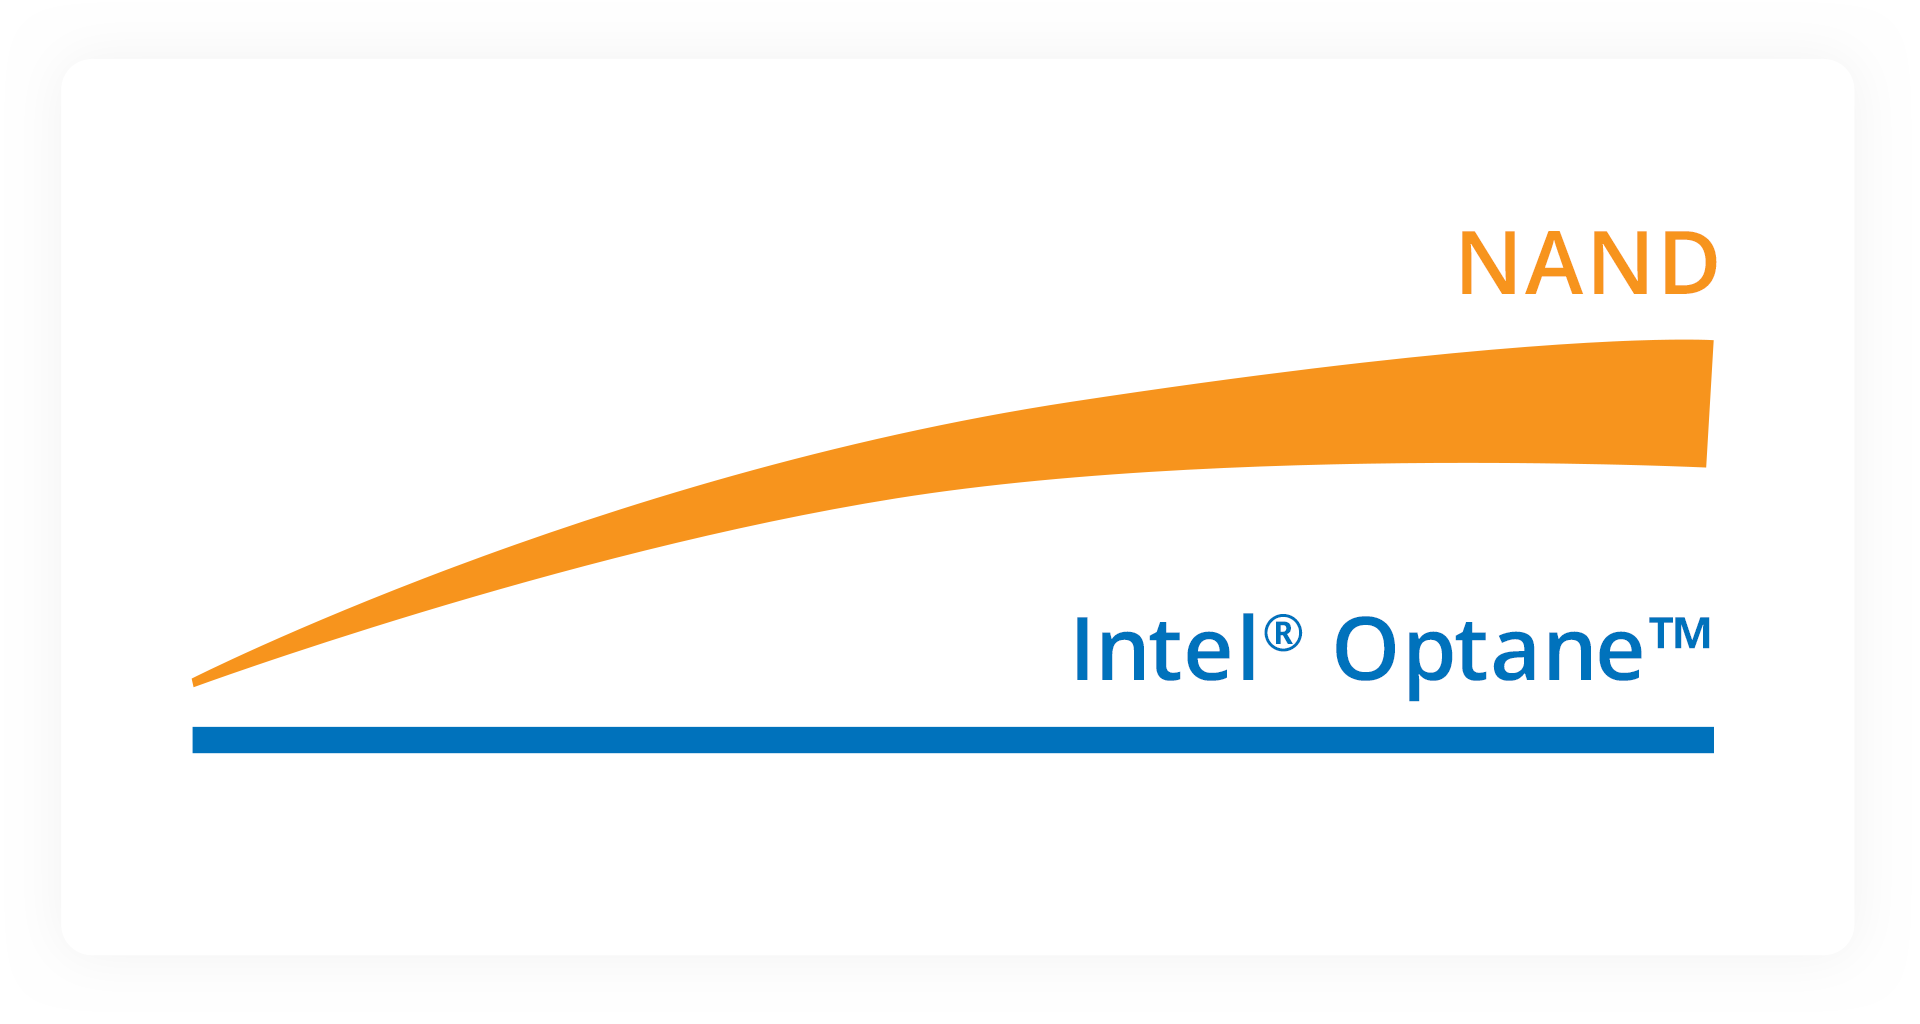 Graph in yellow and blue comparing NAND and Intel Optane